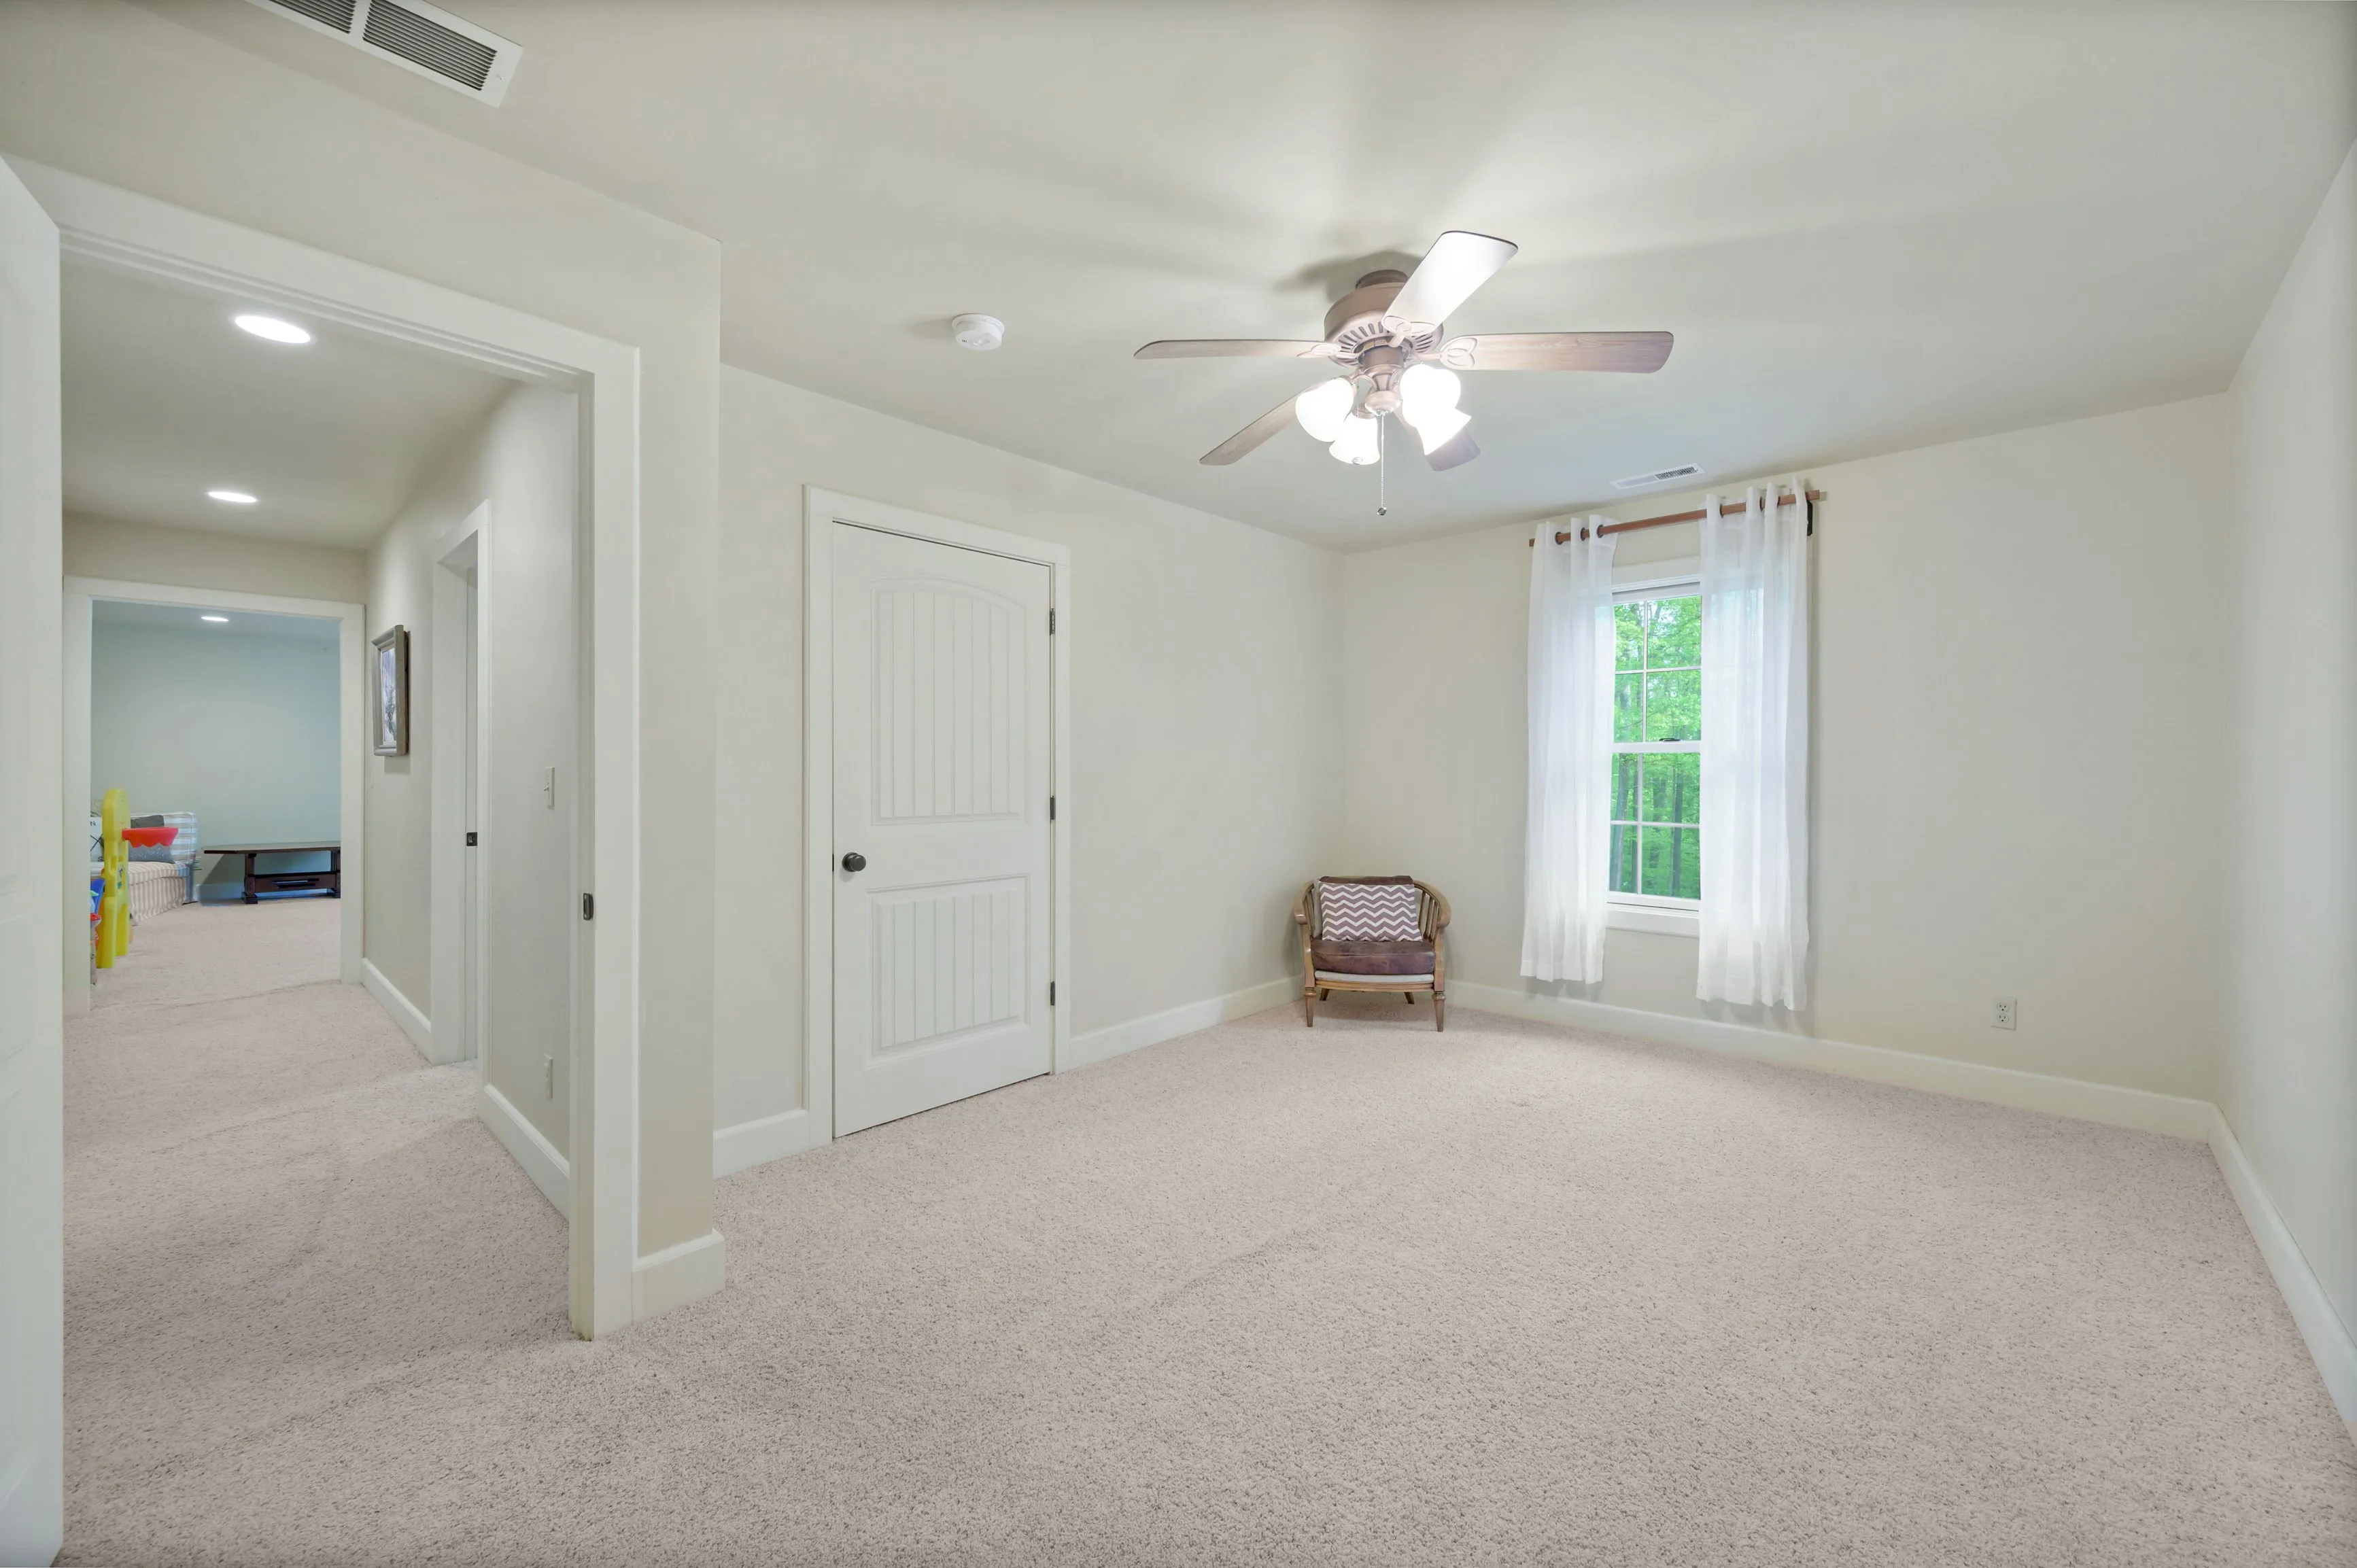 Empty room with beige carpeting, white walls, ceiling fan, a single chair by the window, and an open door showing another room in the background.